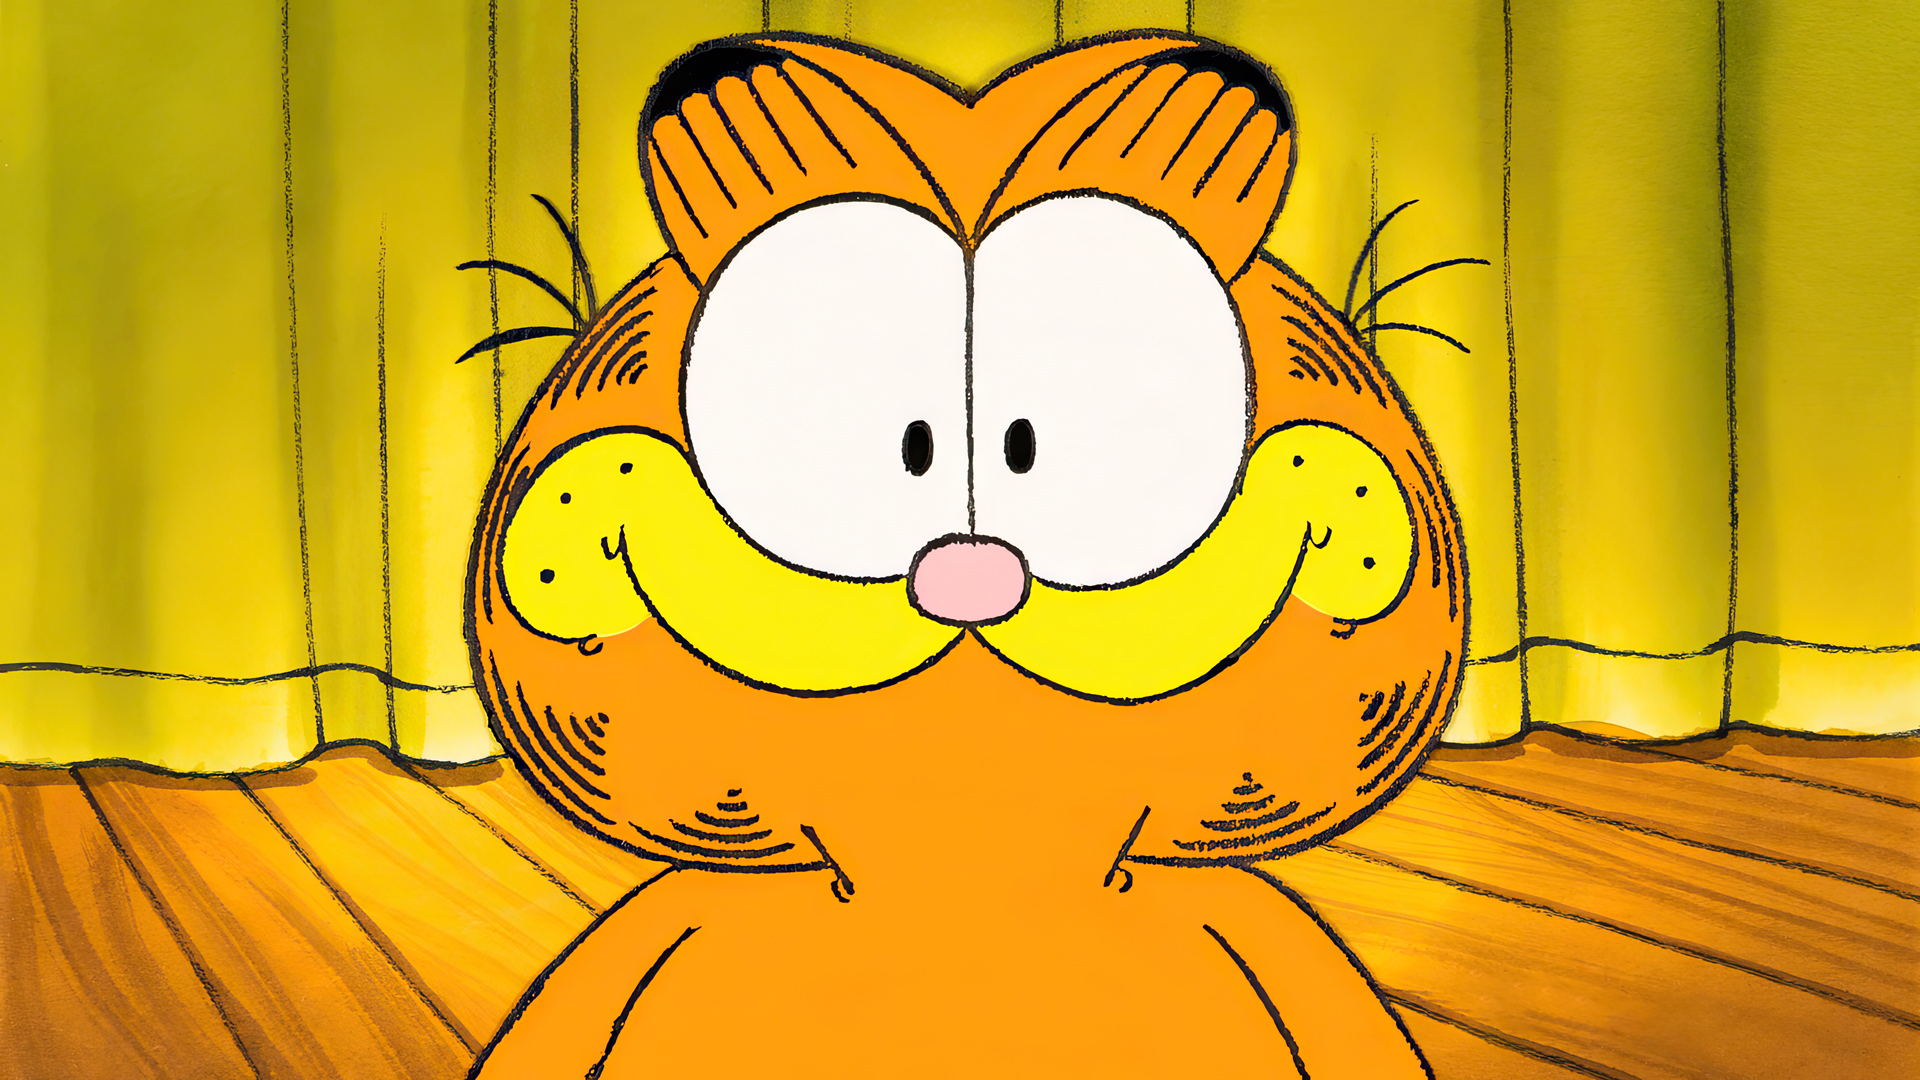 General 1920x1080 Garfield and Friends Garfield animation animated series cartoon production cel cats animals smiling